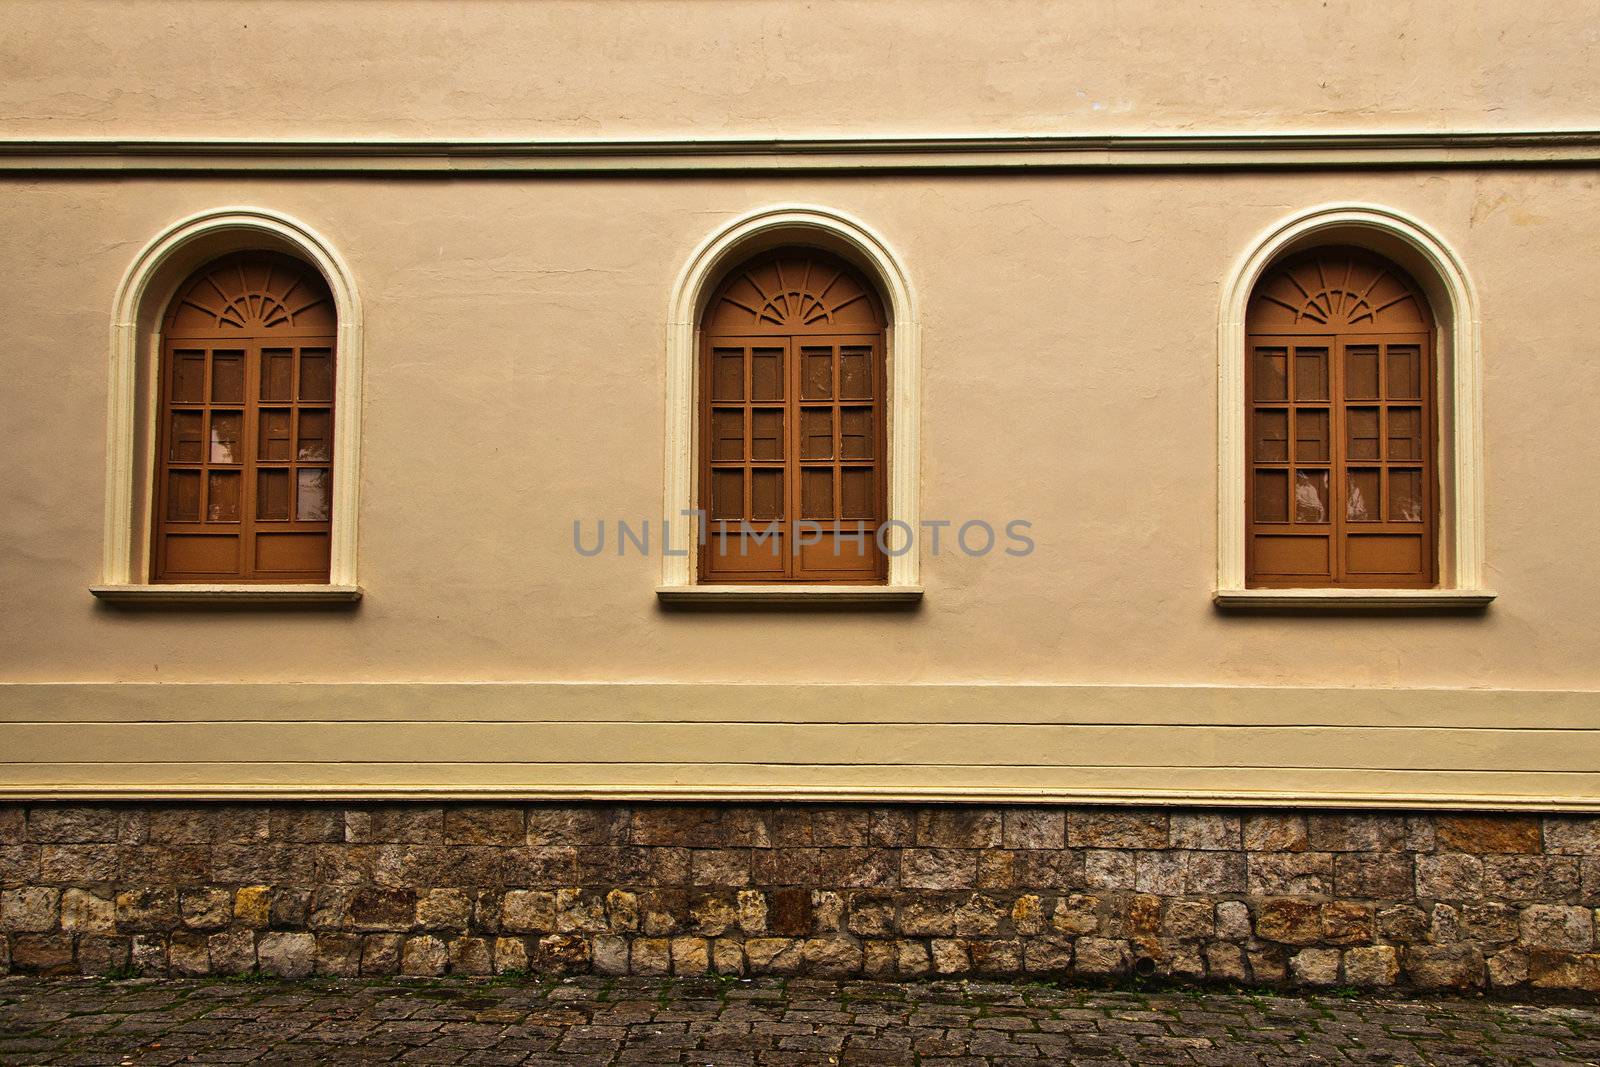 The windows and a colonial wall in Bogota, Colombia.